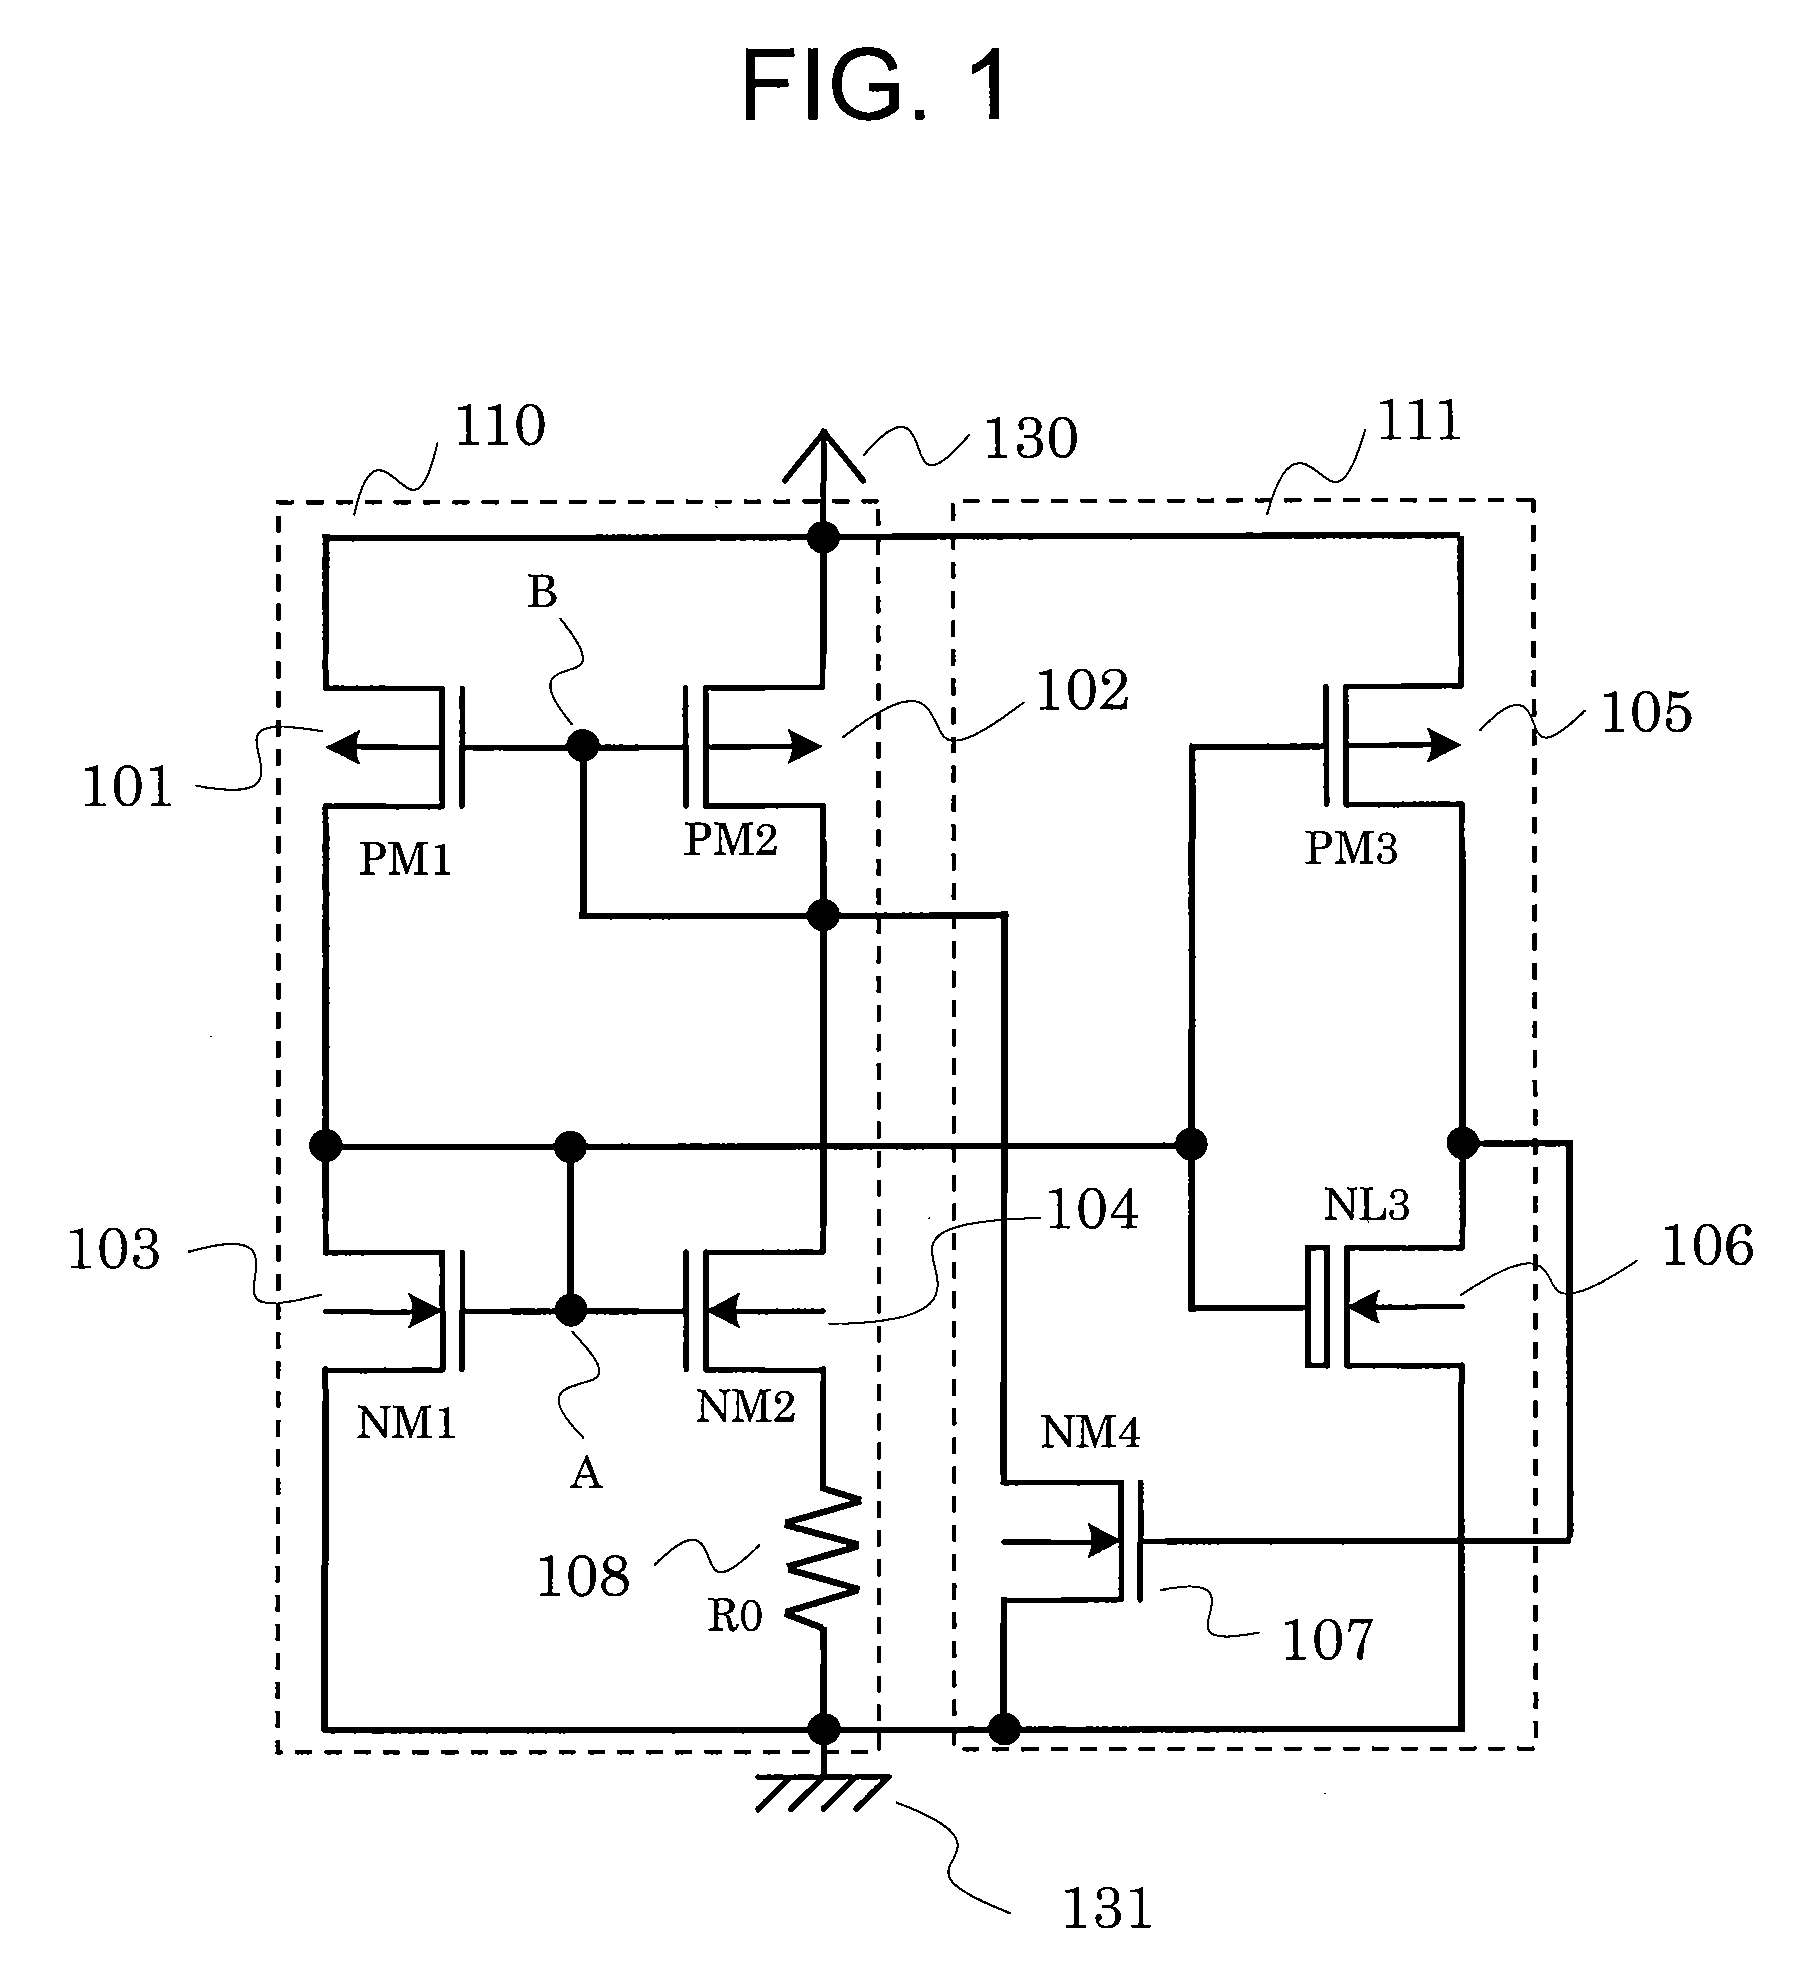 Constant current circuit start-up circuitry for preventing power input oscillation